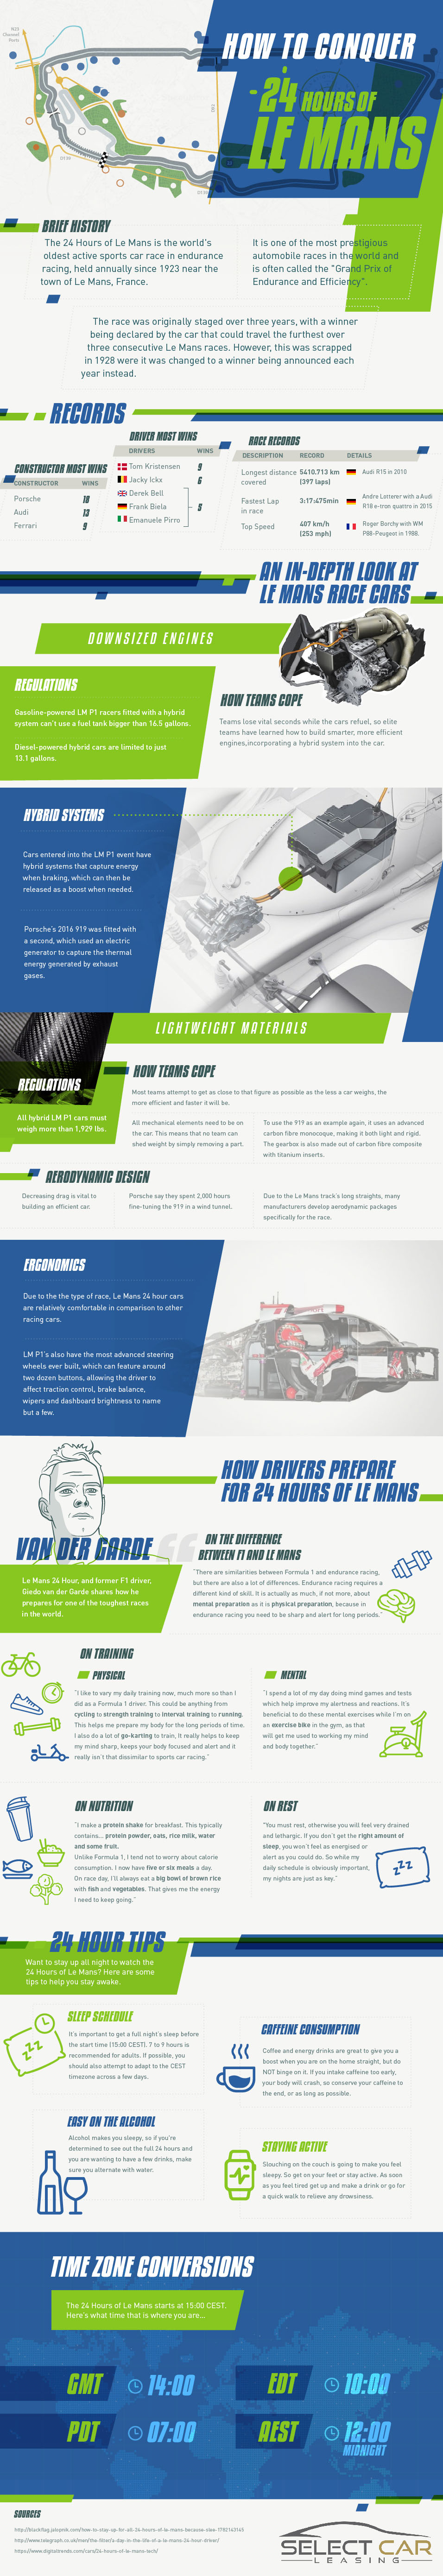 How To Conquer 24 Hours of Le Mans